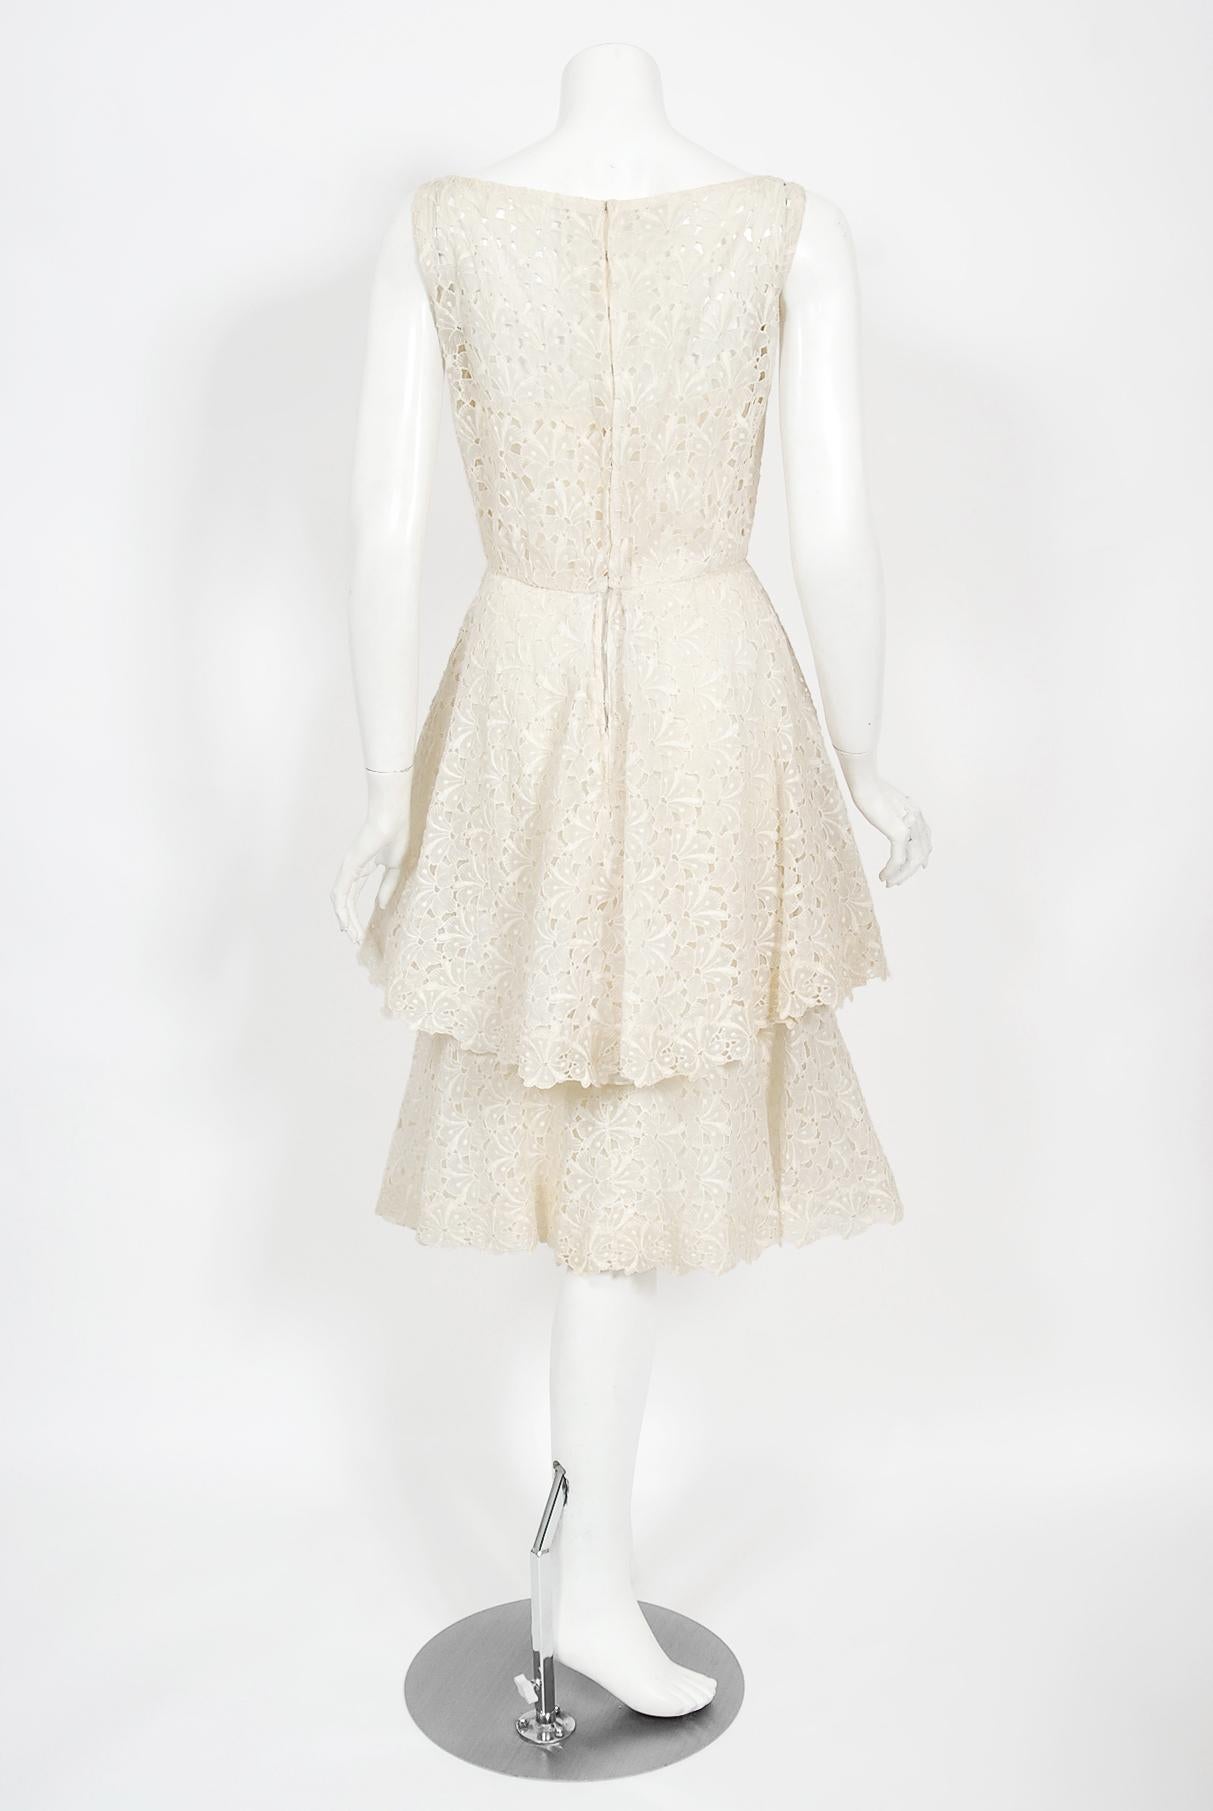 Vintage 1950's Ceil Chapman Ivory Embroidered Eyelet Cotton Tiered Bridal Dress For Sale 3